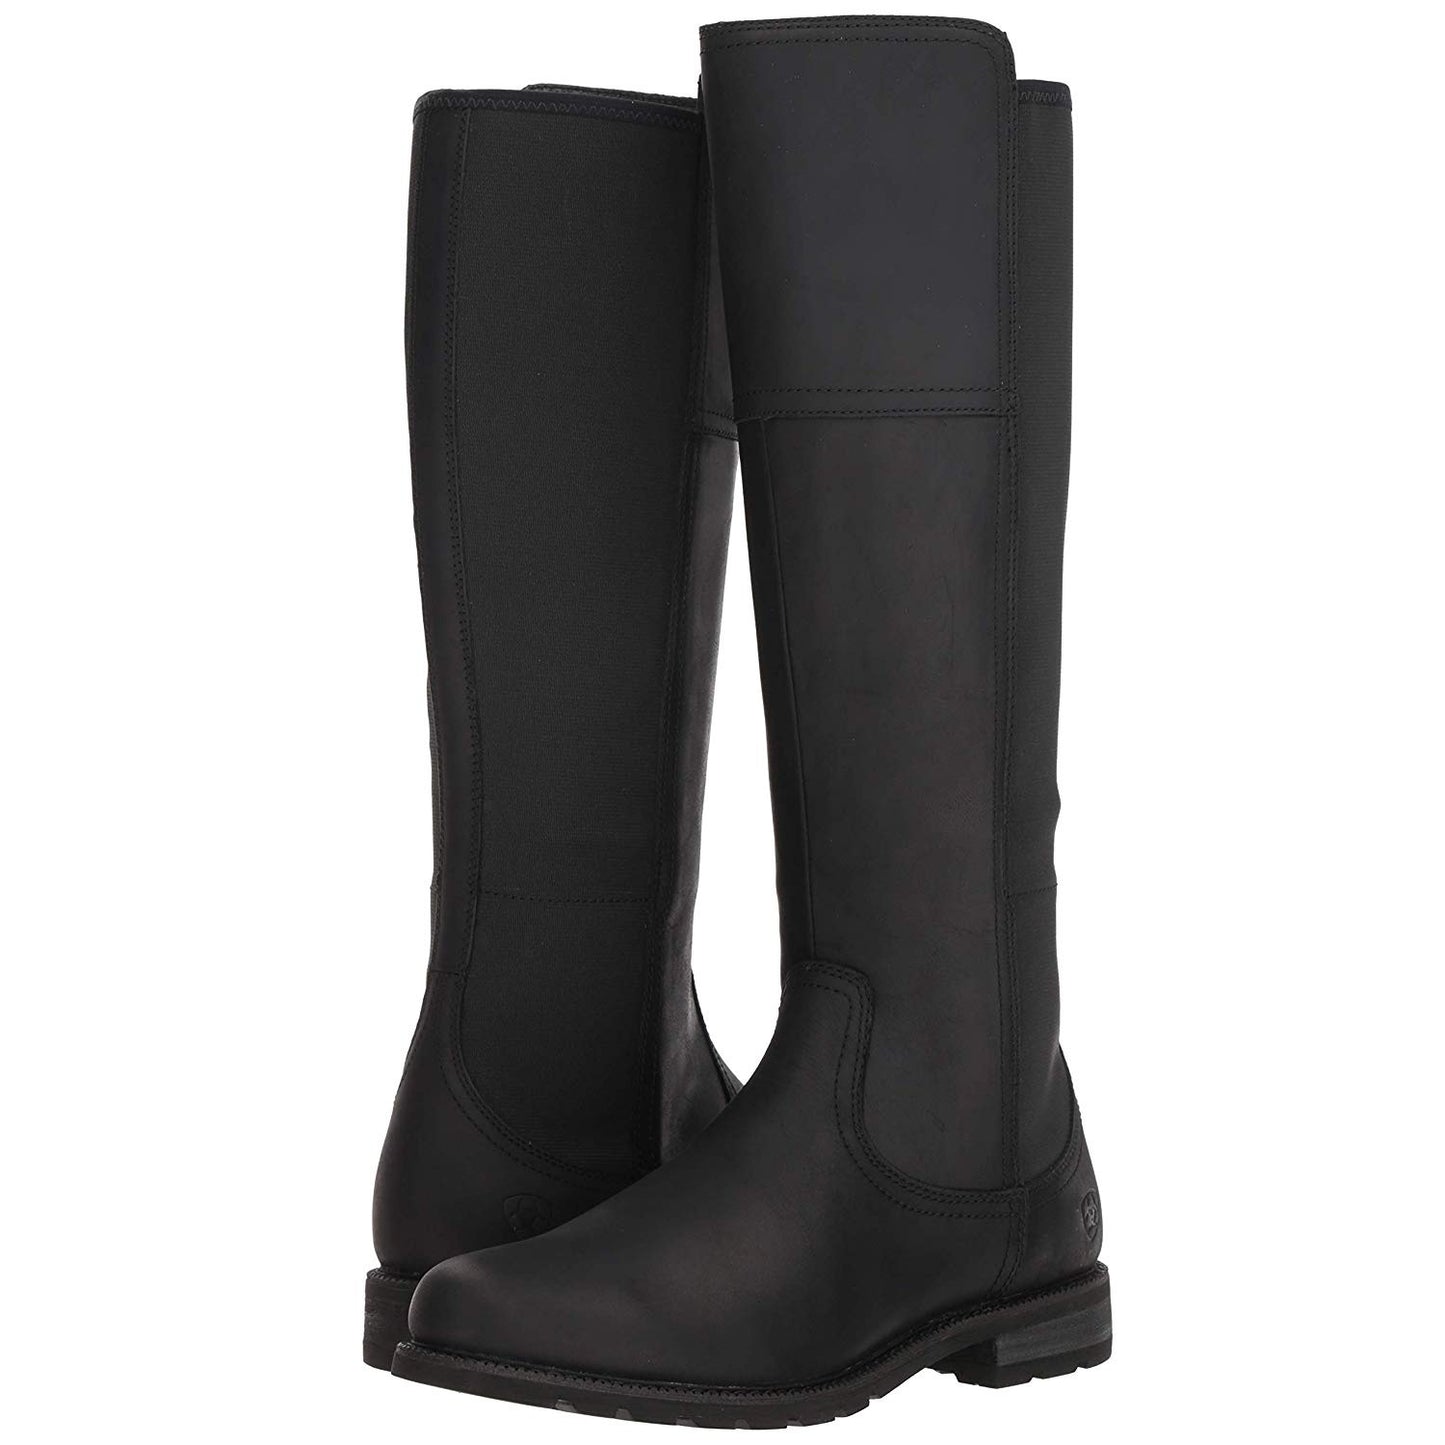 Ariat® Ladies Sutton H2O Waterproof Tall Black Boots 10024986 - Wild West Boot Store